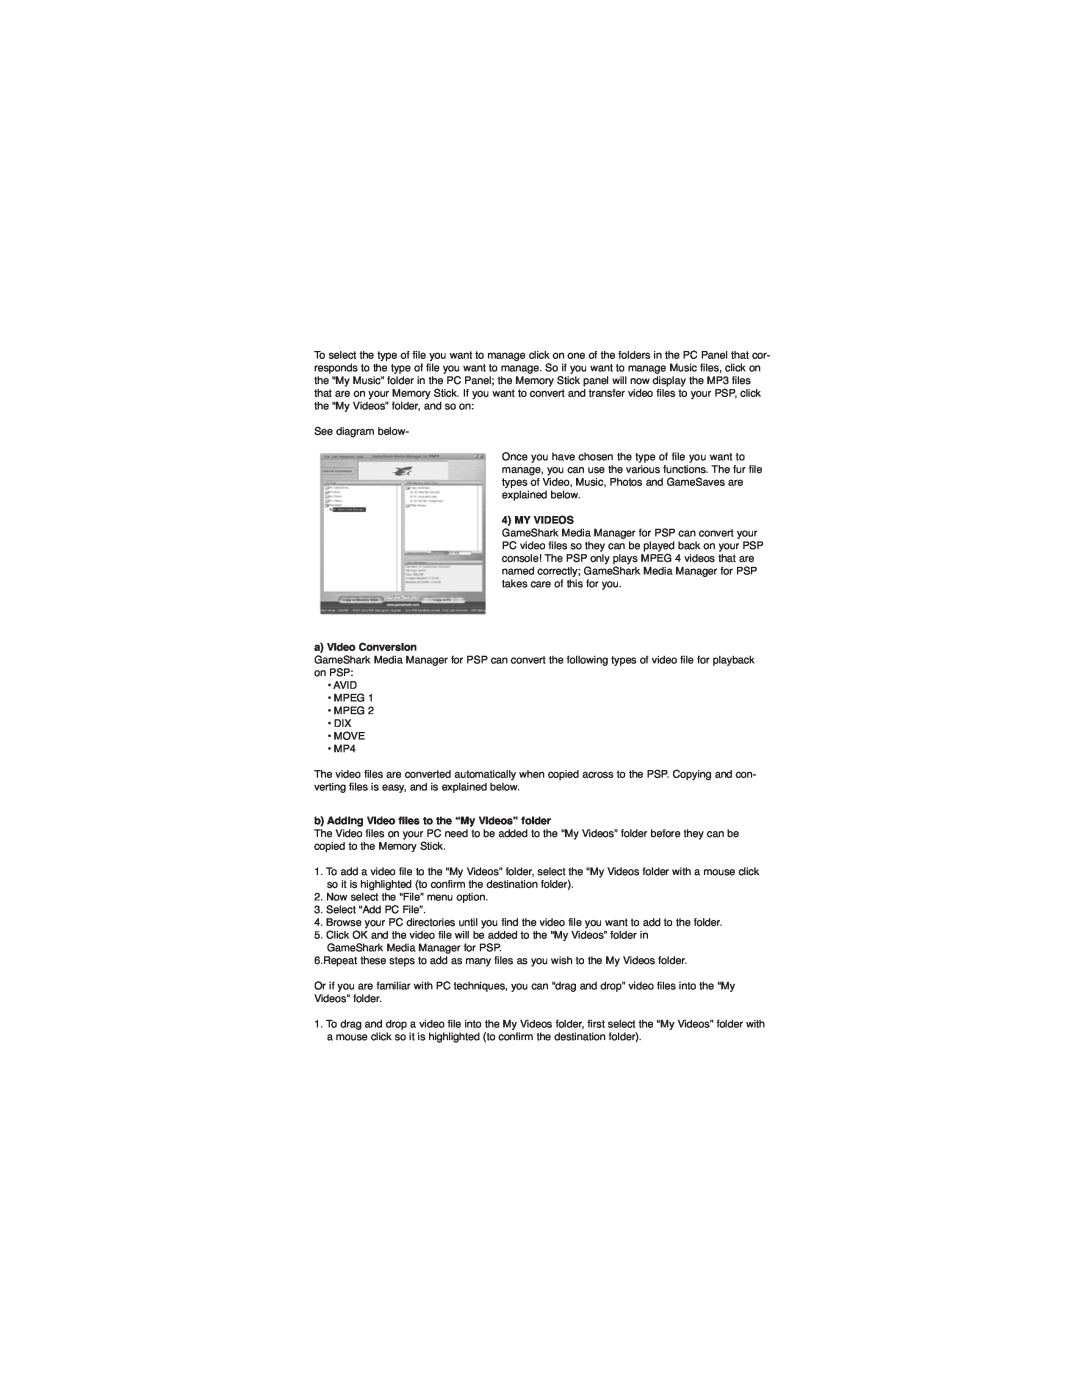 Apple Media Manager for PSP instruction manual a Video Conversion, b Adding Video files to the “My Videos” folder 